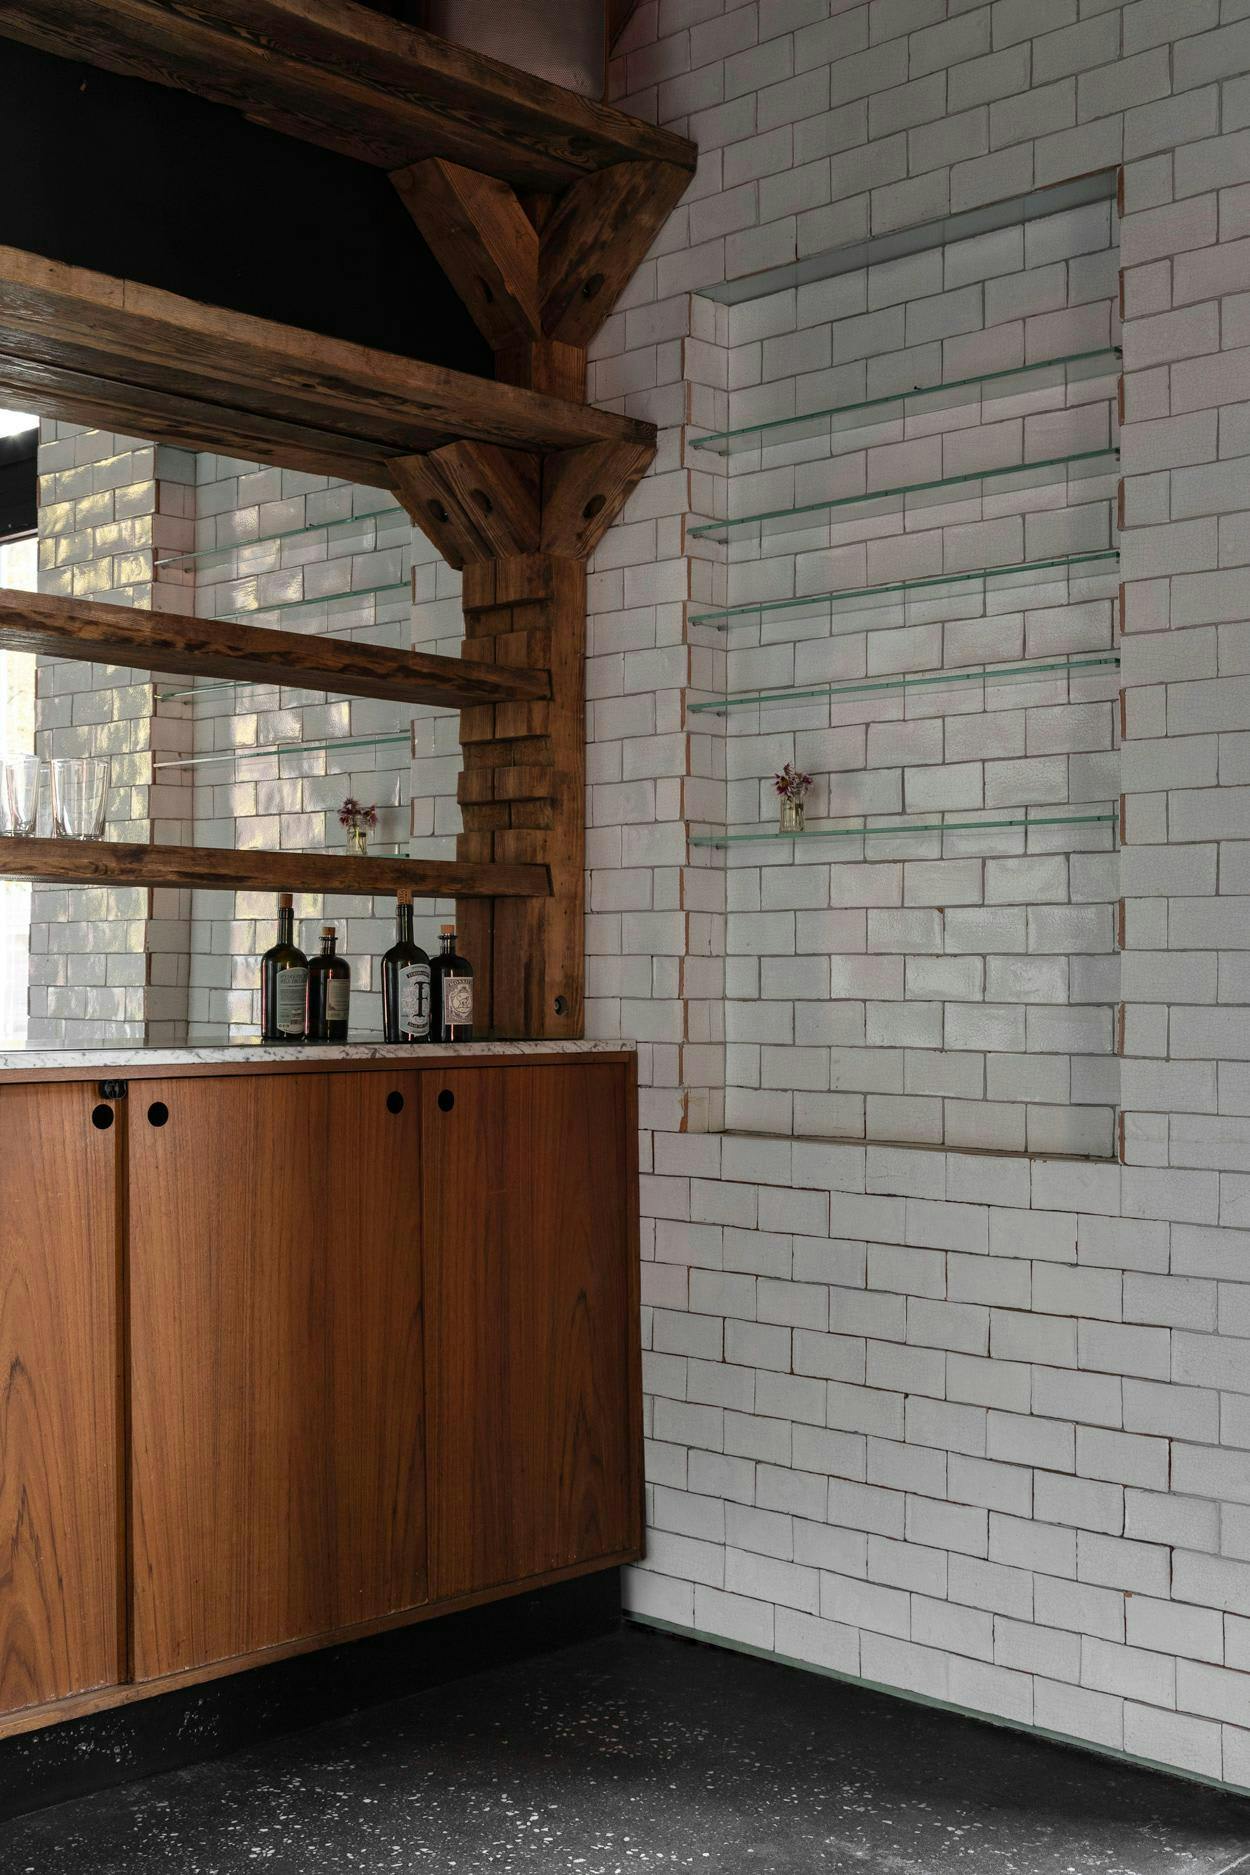 The image features a kitchen with a large window, a wooden cabinet, and a sink.